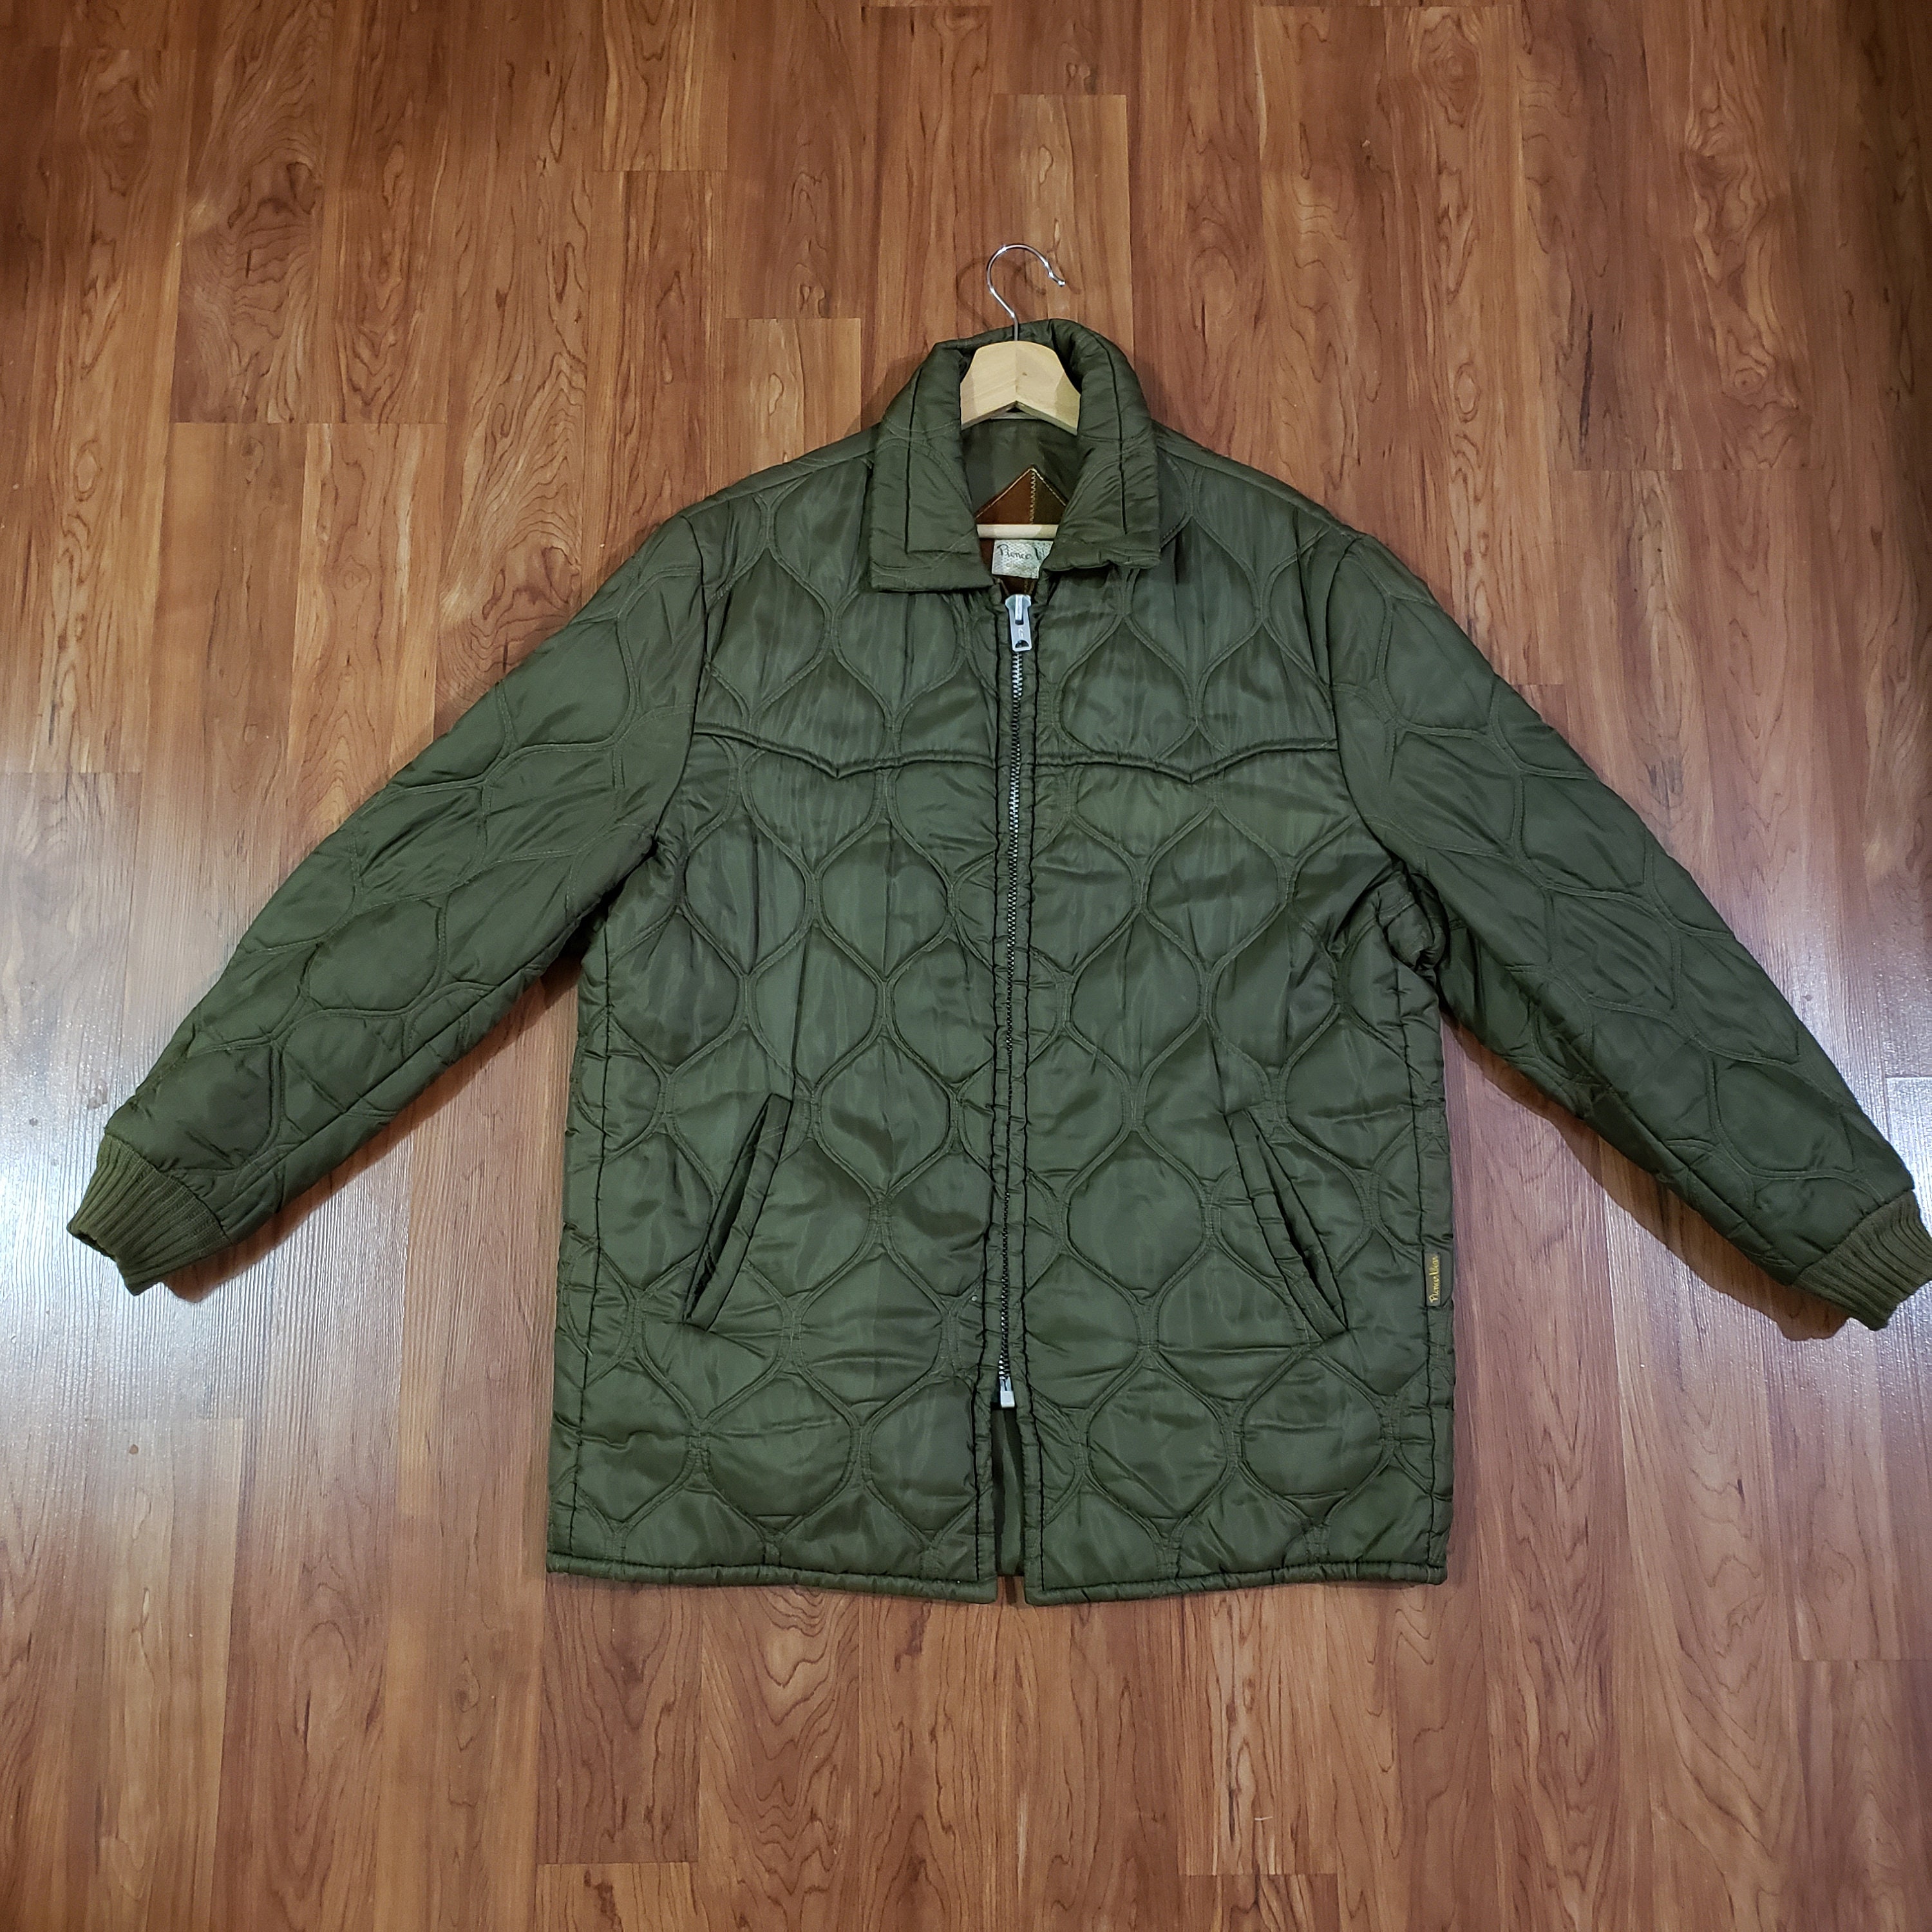 Vintage Green/green Liner Quilted Jacket Oversized Jackets Various Sizes  Xsmall, Small, Medium, Large, XL, XXL 